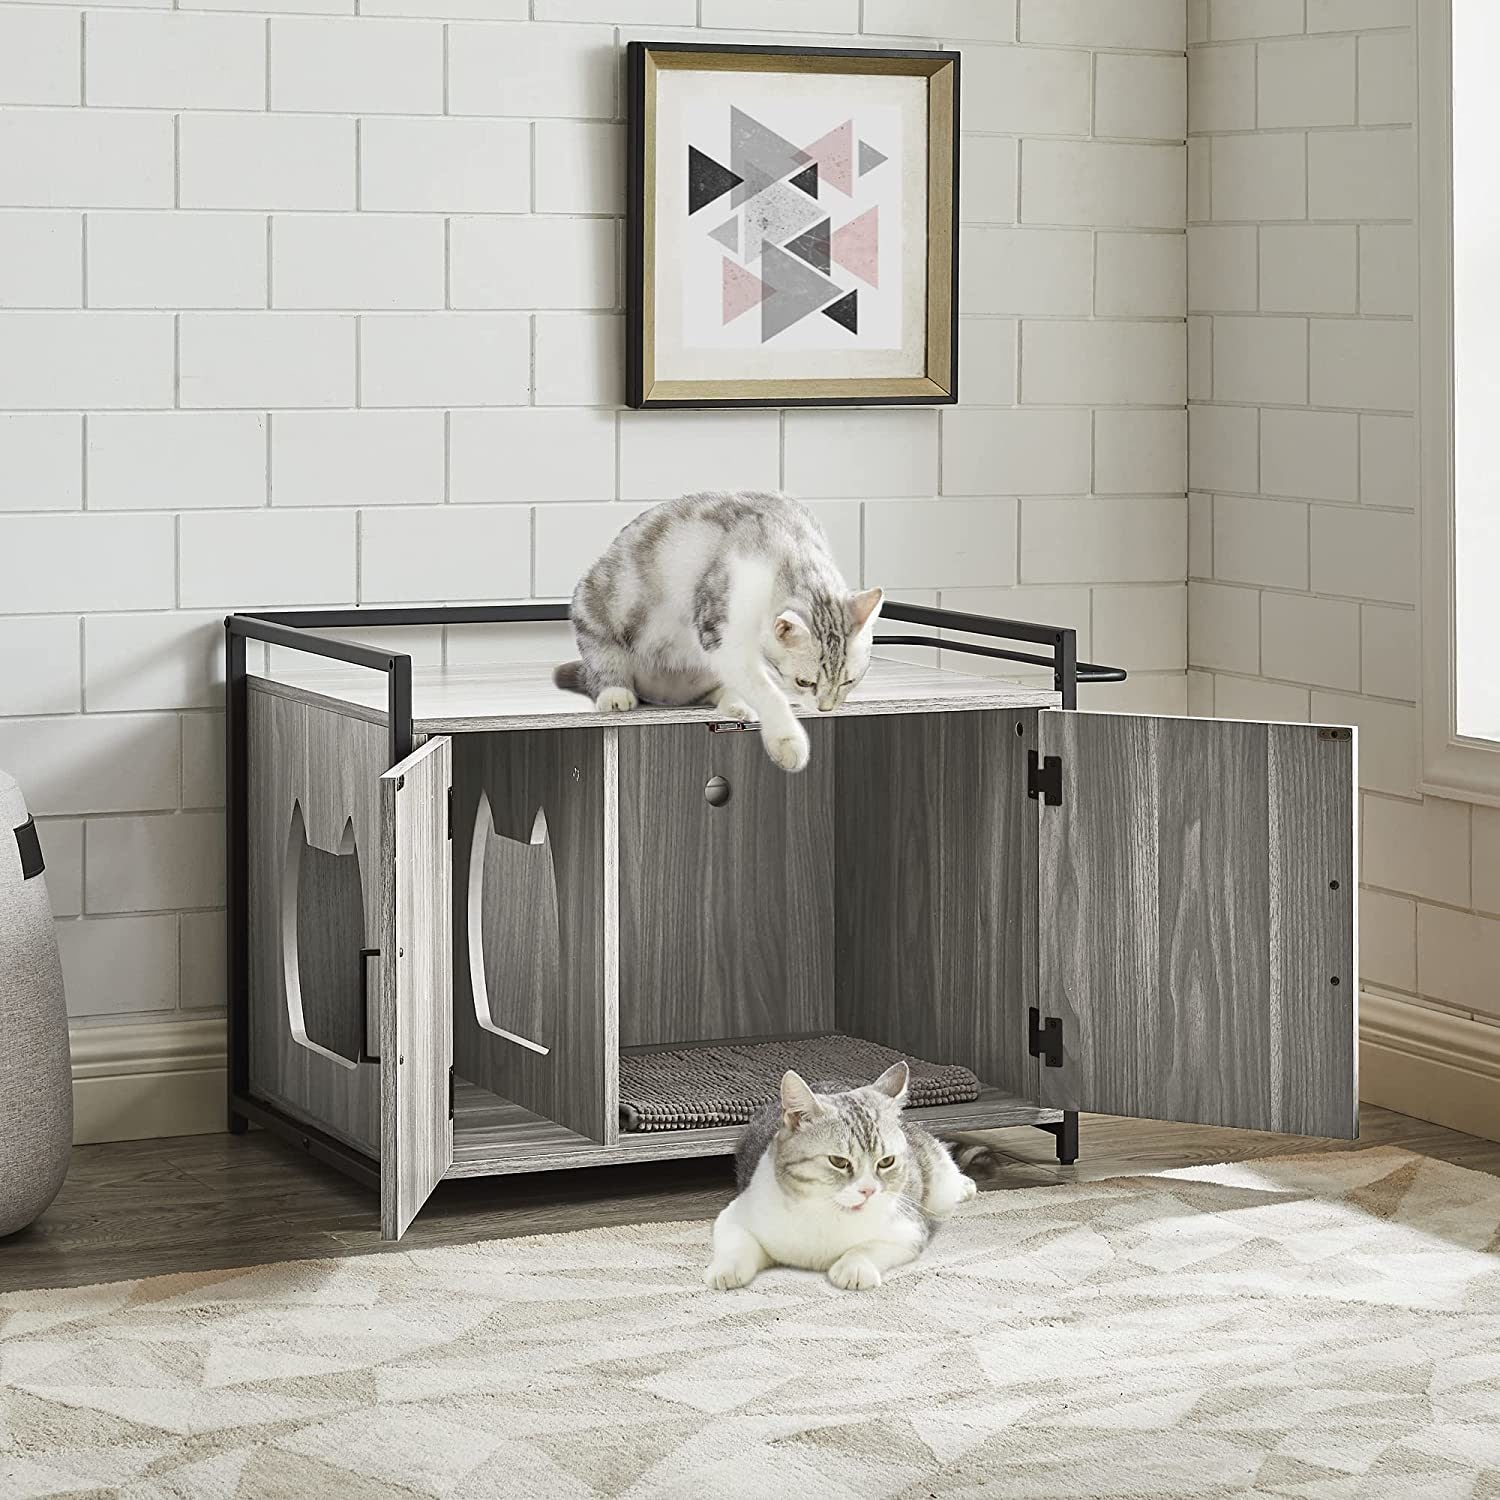 Mgaxyff Hidden Cat Litter Box Furniture with Ventilation and Bench Seat, Pet Crate with Iron and Wood Sturdy Structure